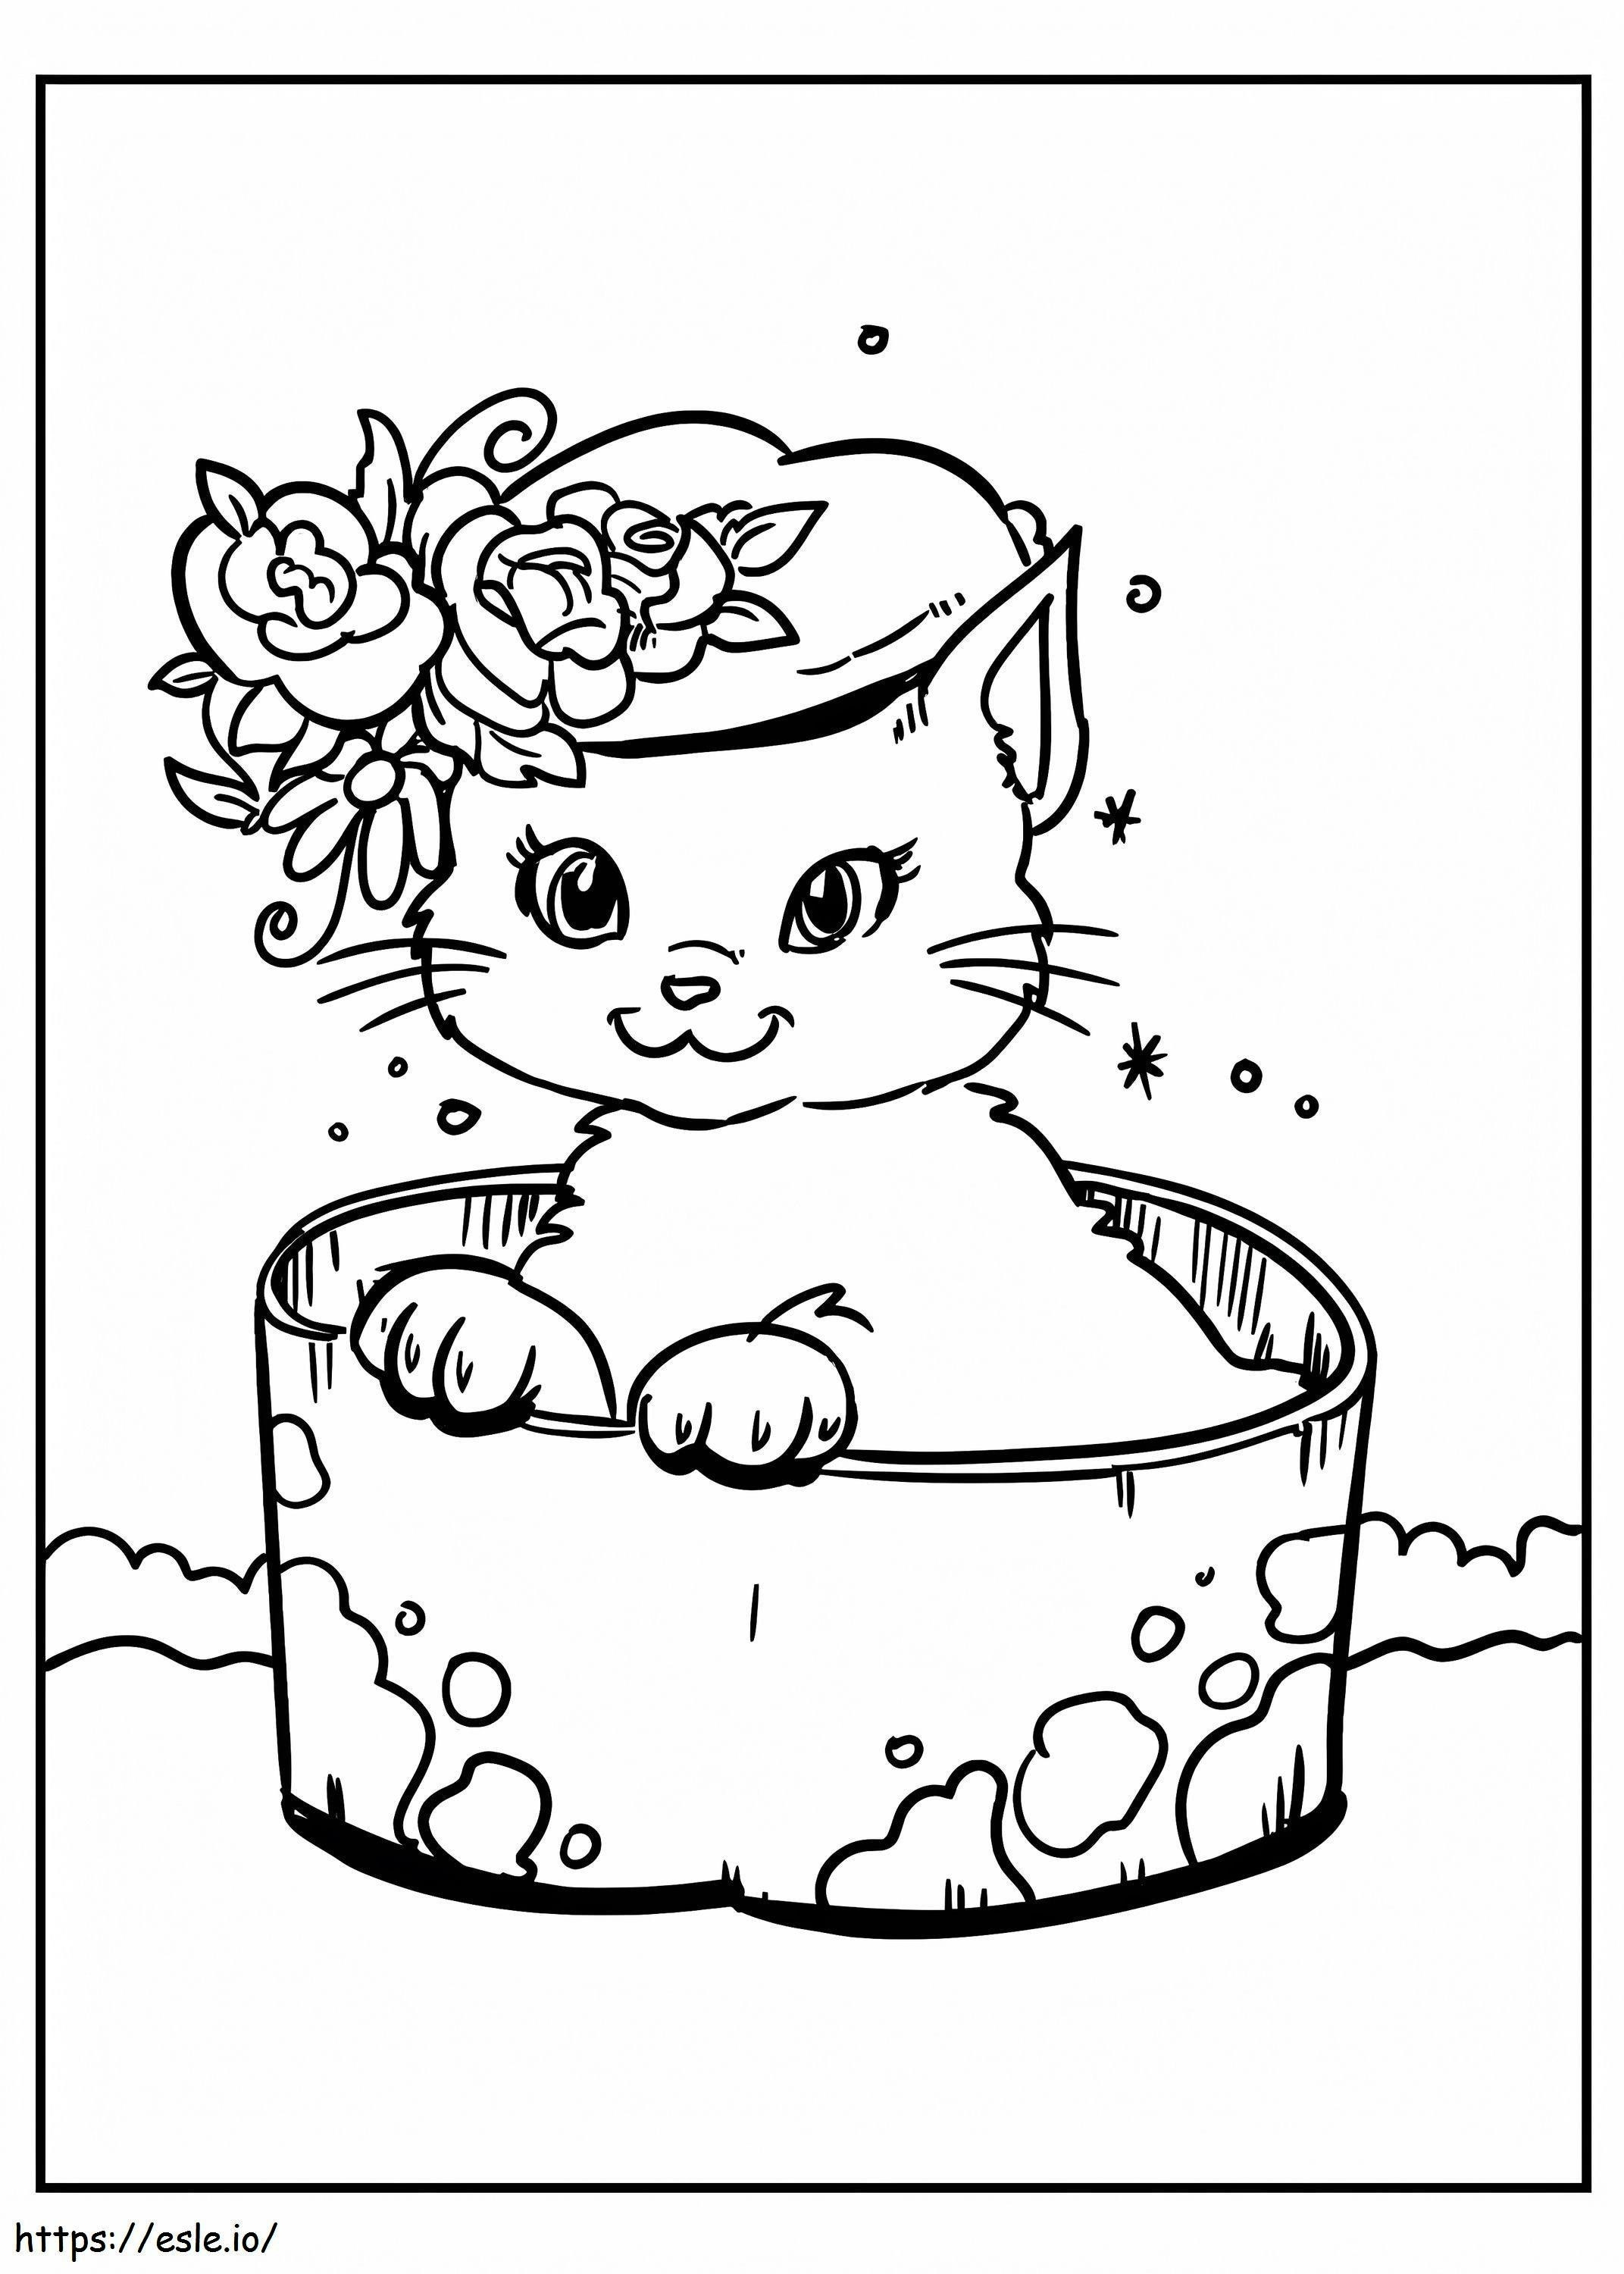 Cat Lying In A Pot coloring page